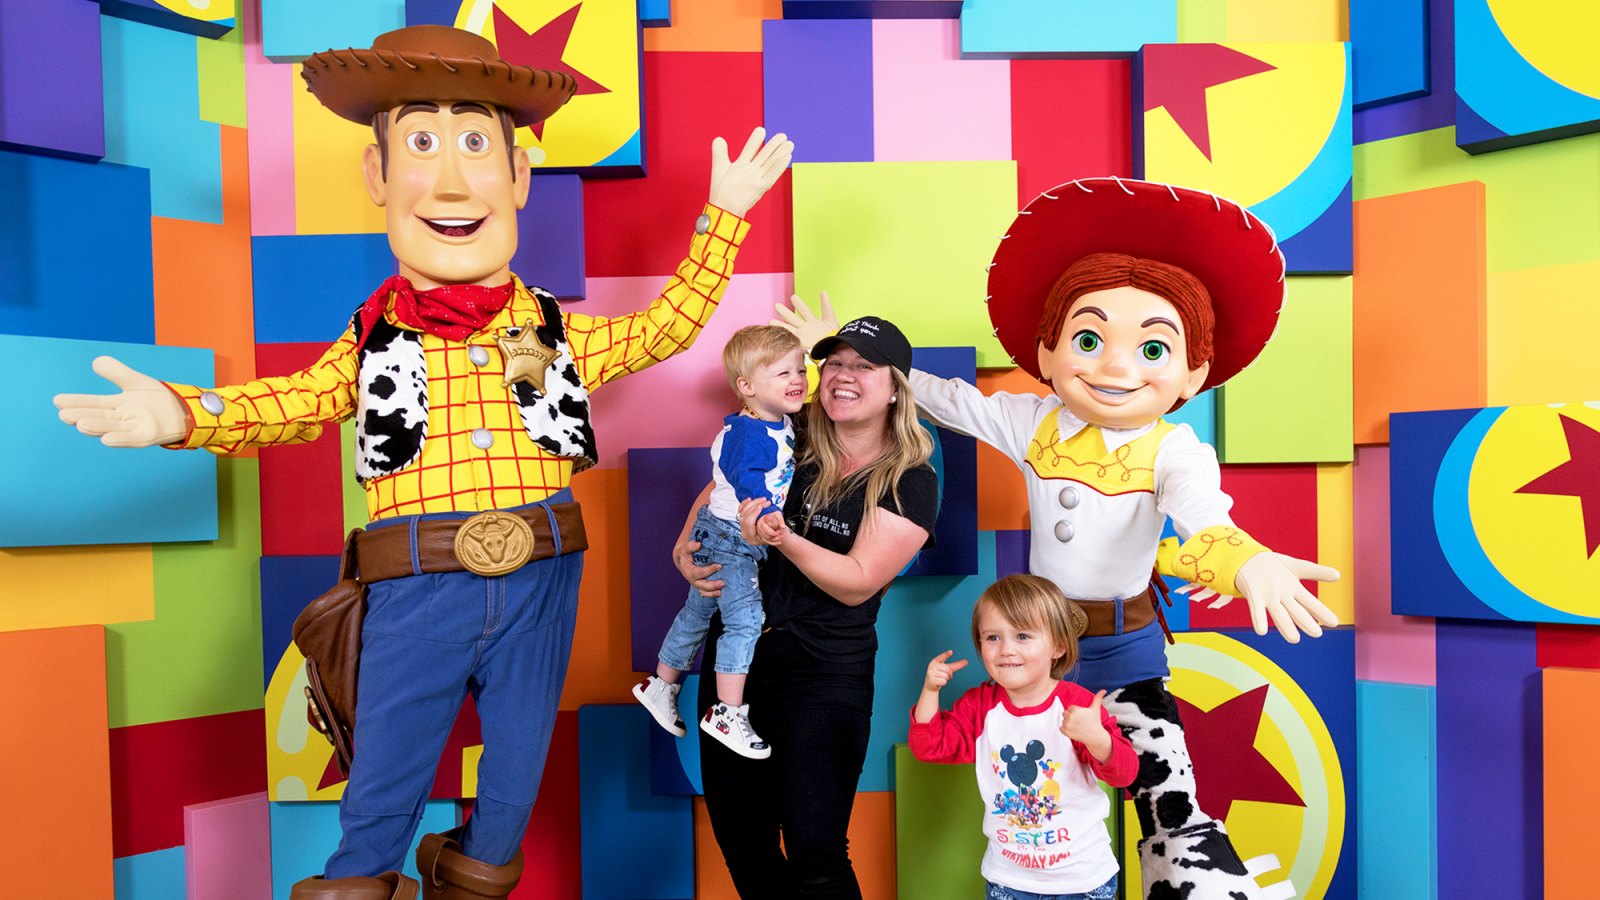 Kelly Clarkson and her children, Remy and River visit with Pixar pals Woody and Jessie at the launch of Pixar Fest at the Disneyland Resort in Anaheim, California.